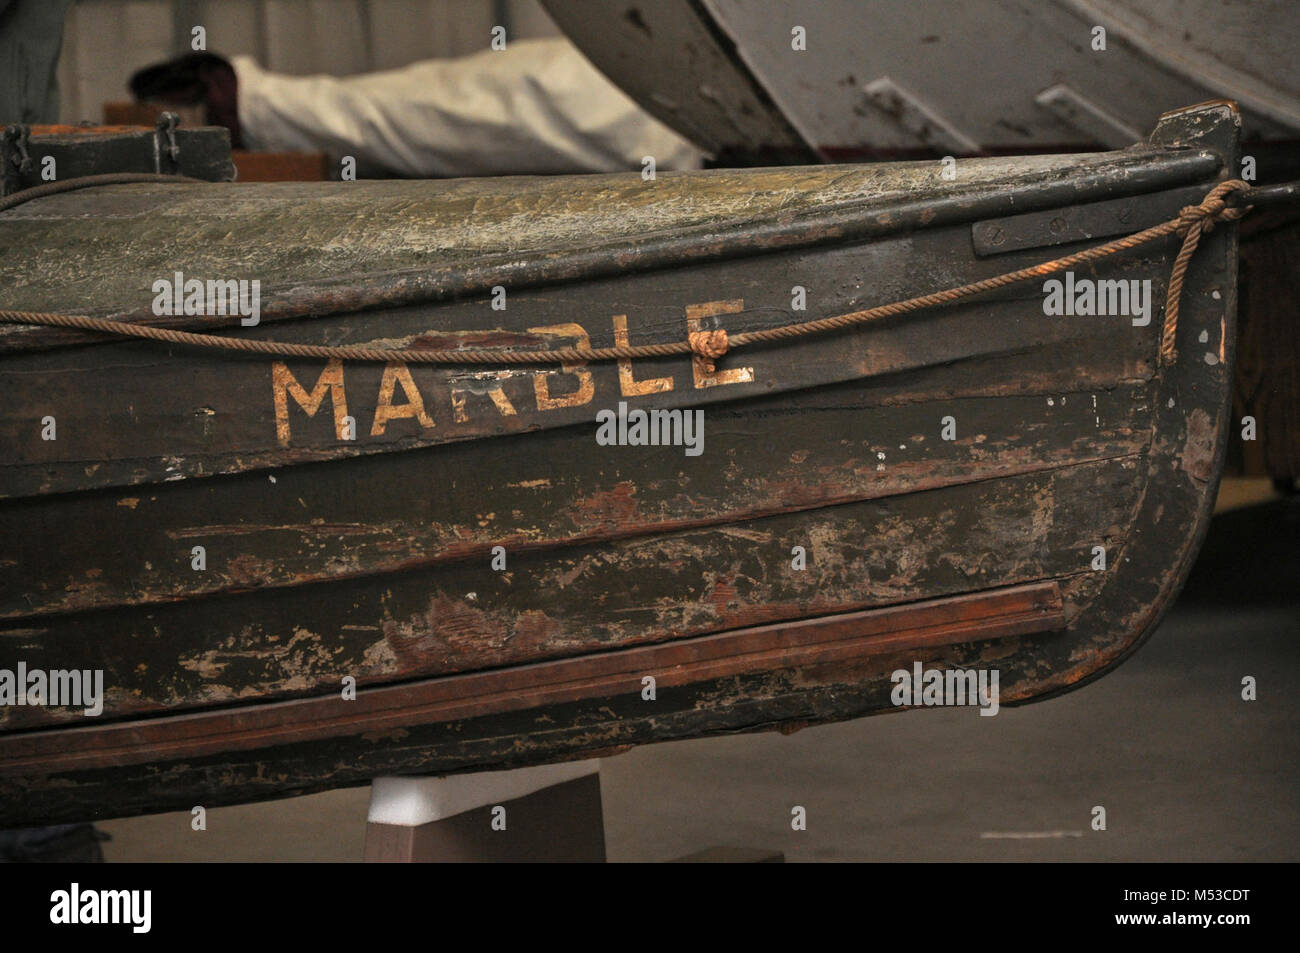 Grand Canyon History Symposium Historic Boat Tour . View of the historic wooden boat, the Marble, in the museum collection storage area. [Brown worn wooden starboard side with name painted in white capital lettering.]  The Grand Canyon Historical Society [GCHS] held the 4th Grand Canyon History Symposium on the  South Rim, Grand Canyon National Park, on November 4-6, 2016.  As one of the many events and presentations held during the 4th Grand Cany Stock Photo